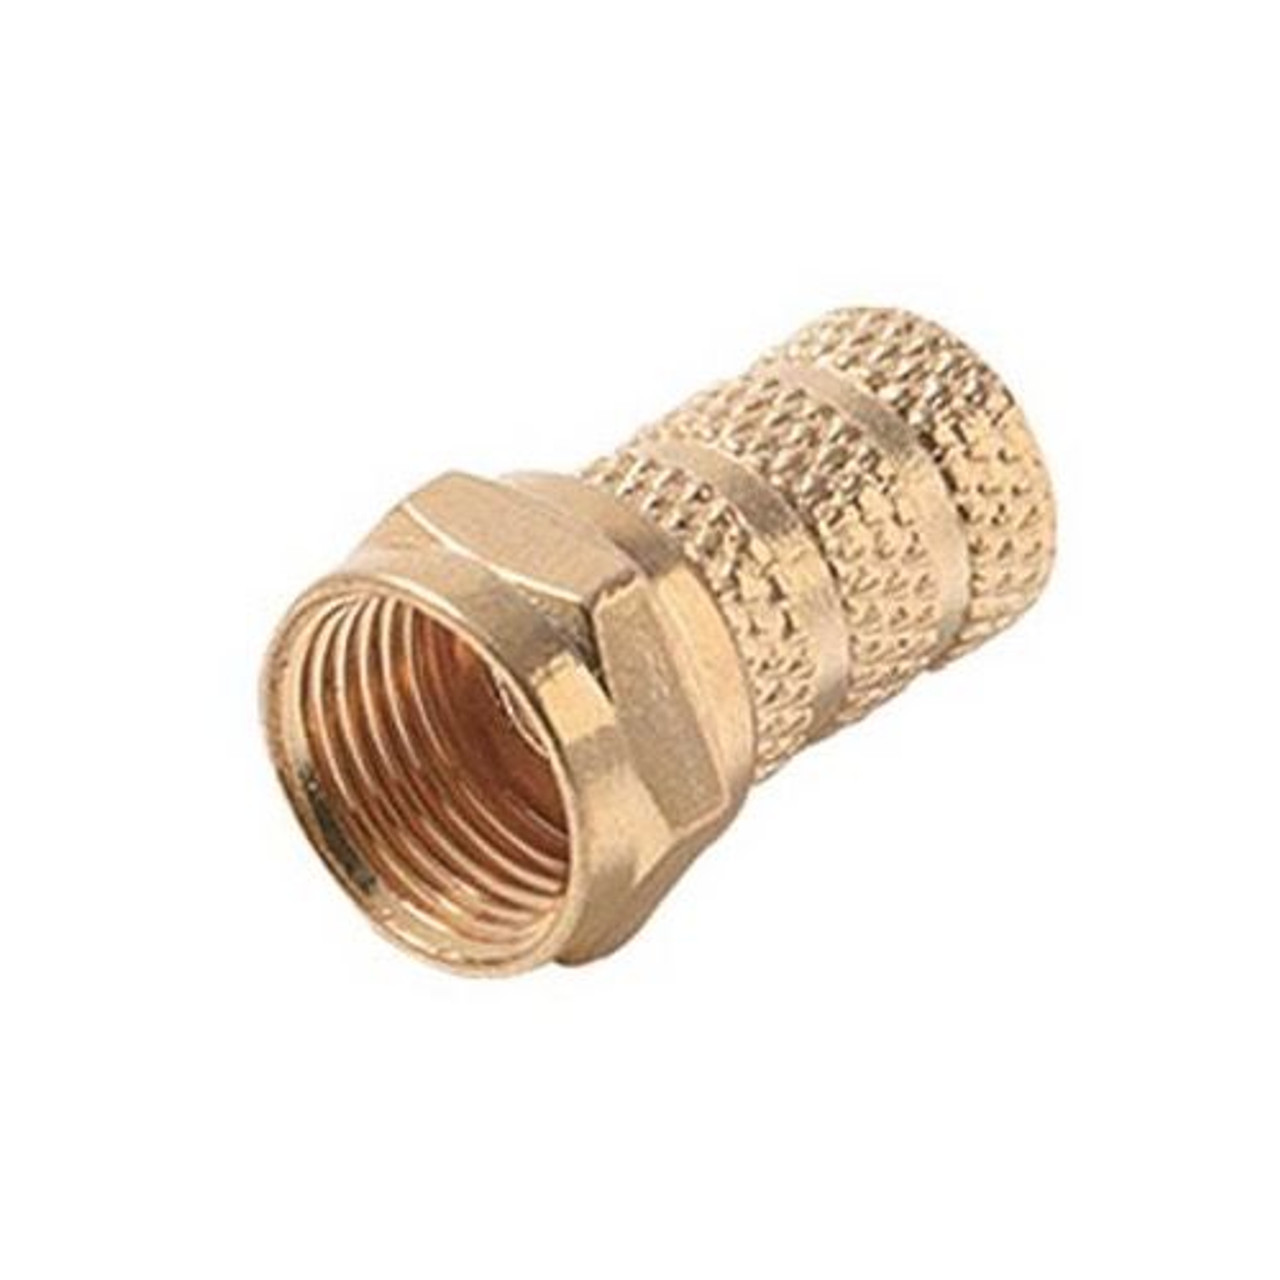 RCA VH60 F Twist-On F Connector RG59 Coaxial Gold RCA 1 Pack Single Tool Less Coax Cable RG-59 Antenna Video Data Signal Connectors, Part # VH60